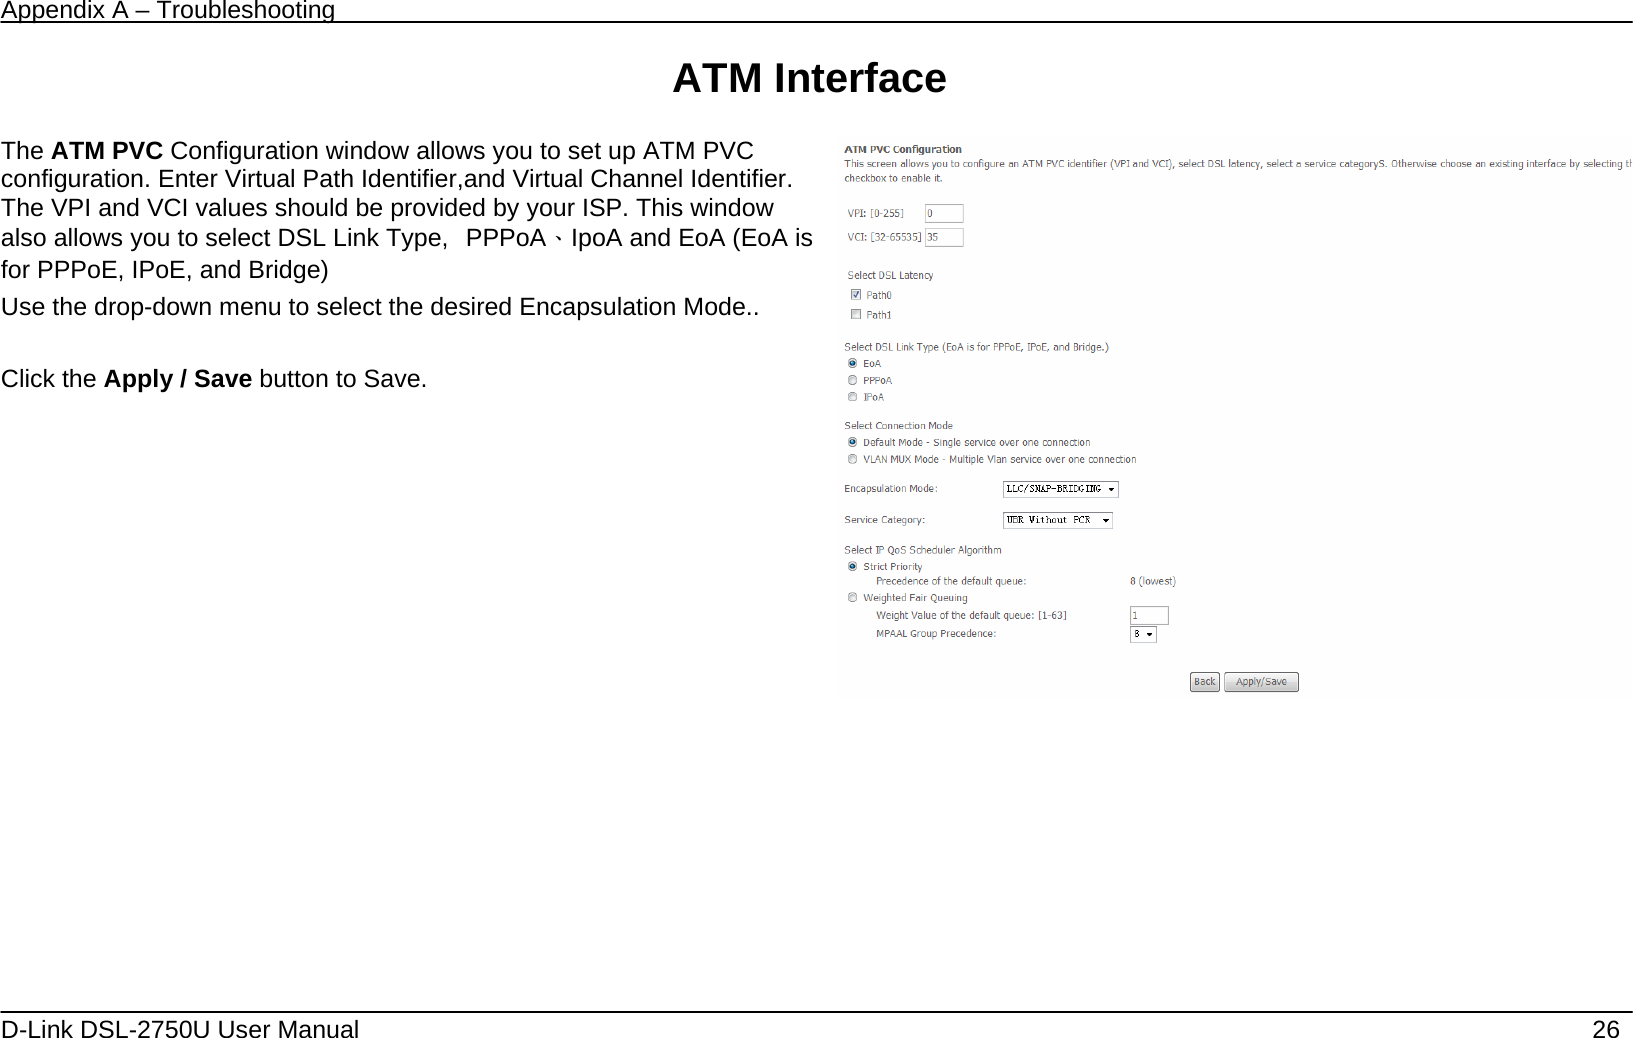 Appendix A – Troubleshooting   D-Link DSL-2750U User Manual    26 ATM Interface           The ATM PVC Configuration window allows you to set up ATM PVC configuration. Enter Virtual Path Identifier,and Virtual Channel Identifier. The VPI and VCI values should be provided by your ISP. This window also allows you to select DSL Link Type,  PPPoA、IpoA and EoA (EoA is for PPPoE, IPoE, and Bridge) Use the drop-down menu to select the desired Encapsulation Mode..  Click the Apply / Save button to Save.               